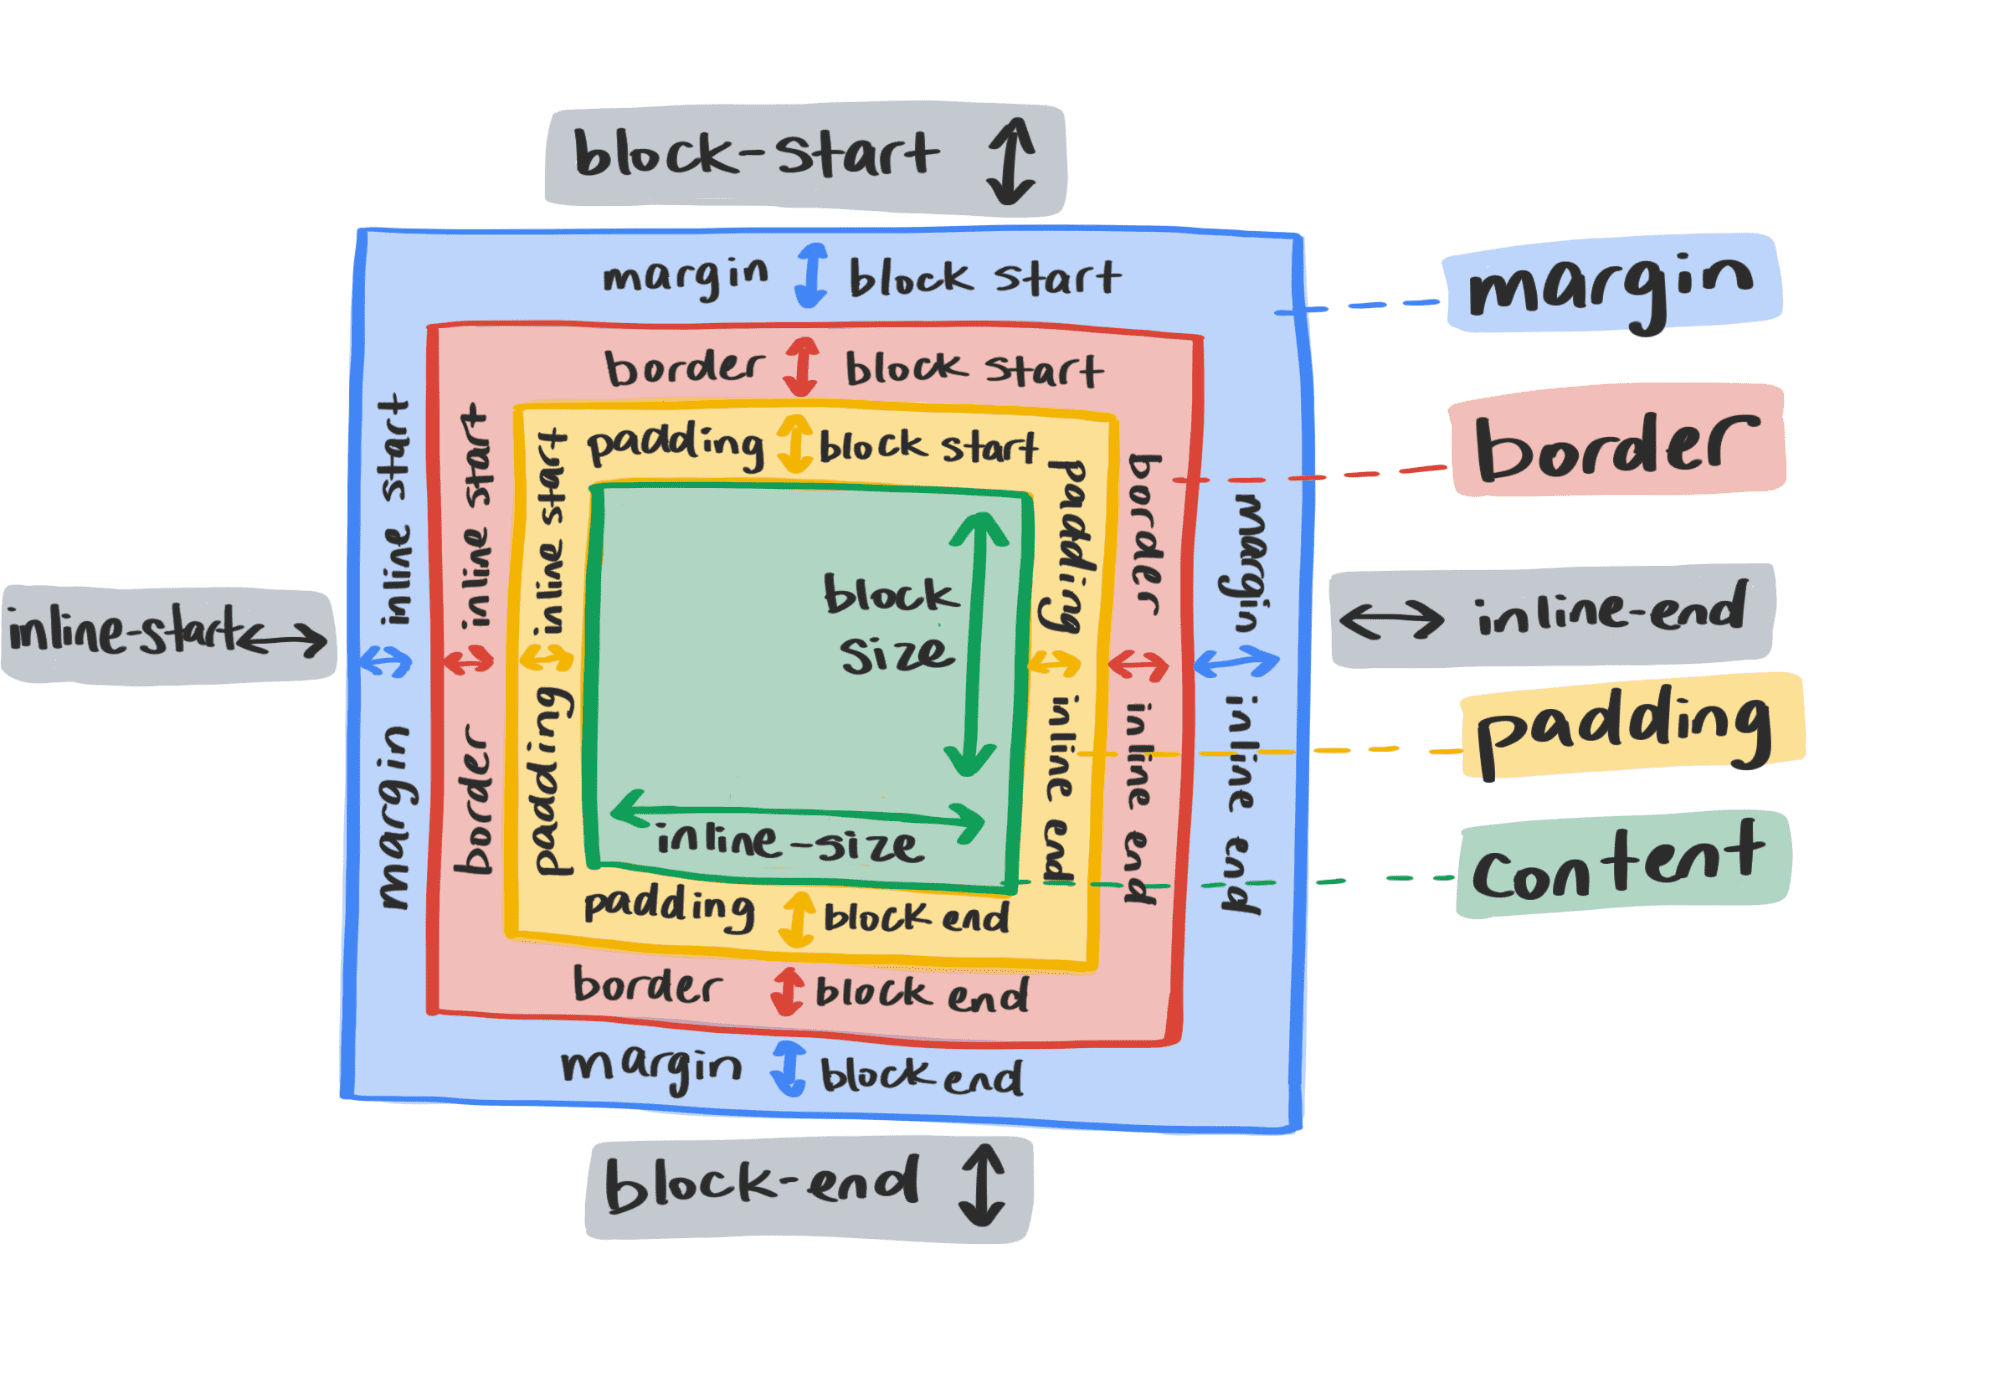 A diagram showing new CSS logical layout properties.